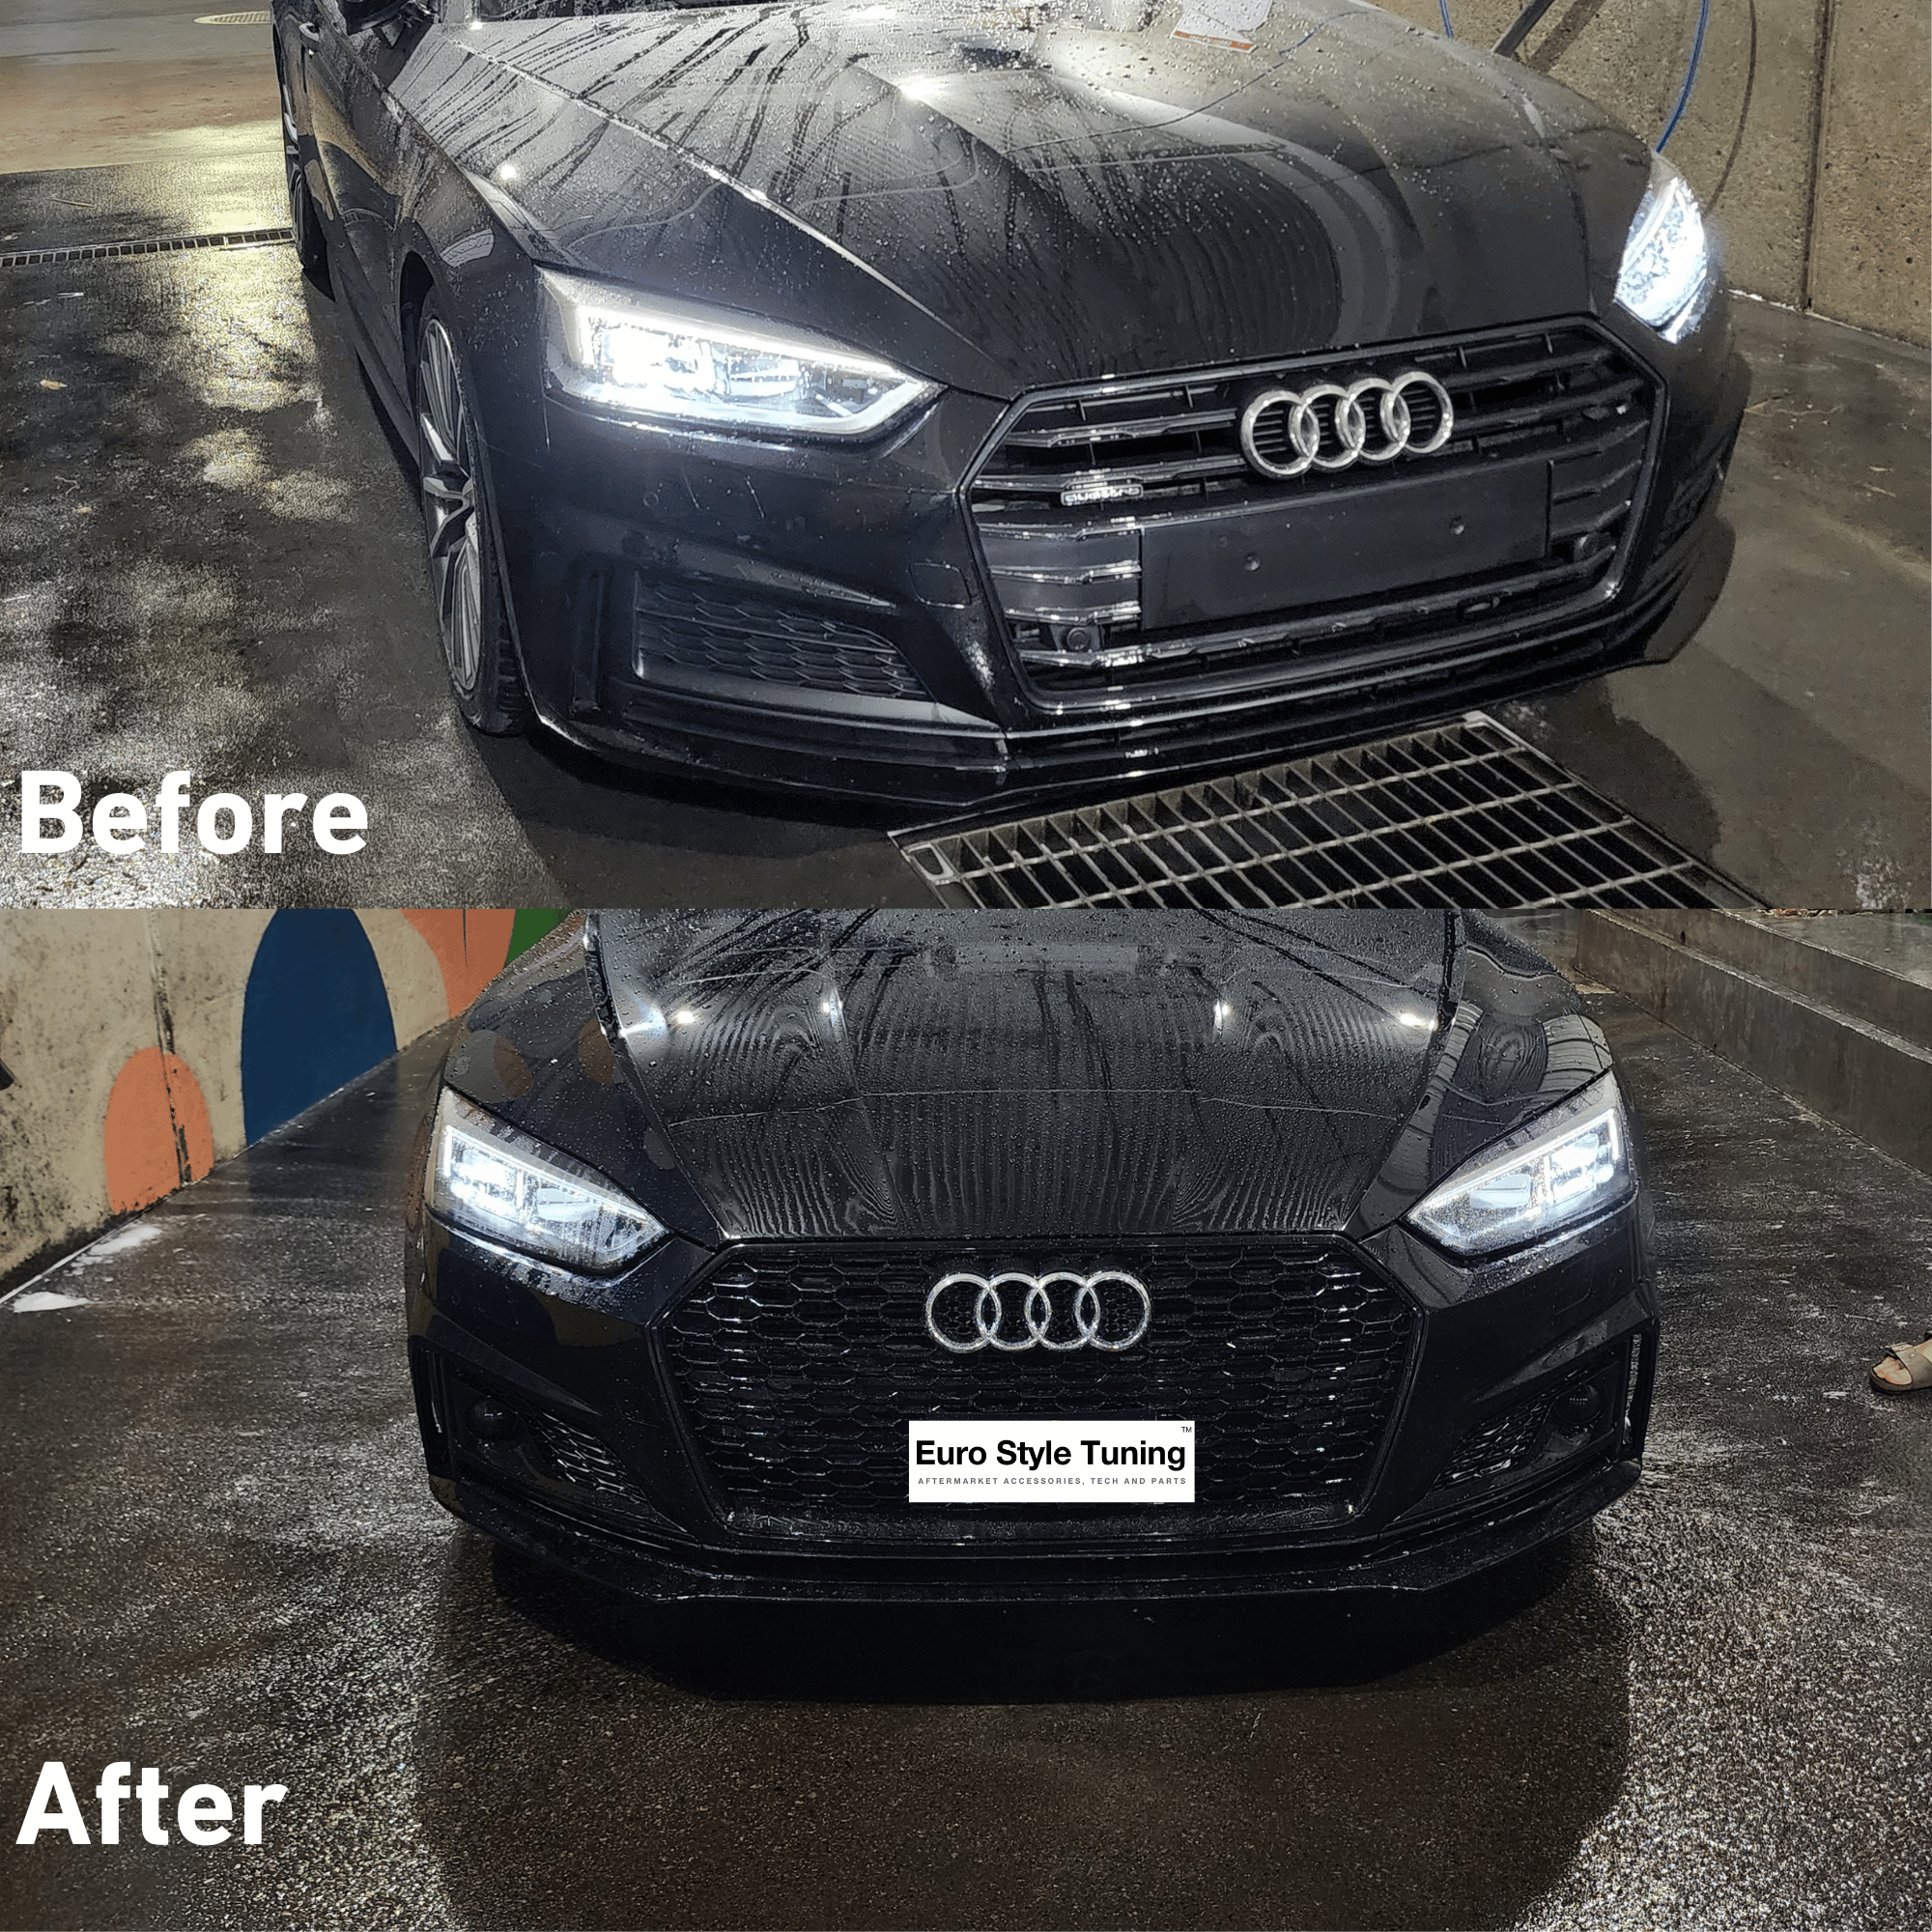 Front Blackout Pack Audi B9 - Honeycomb Grille + Gloss Fog light Inserts - For A4/S4/A5/S5